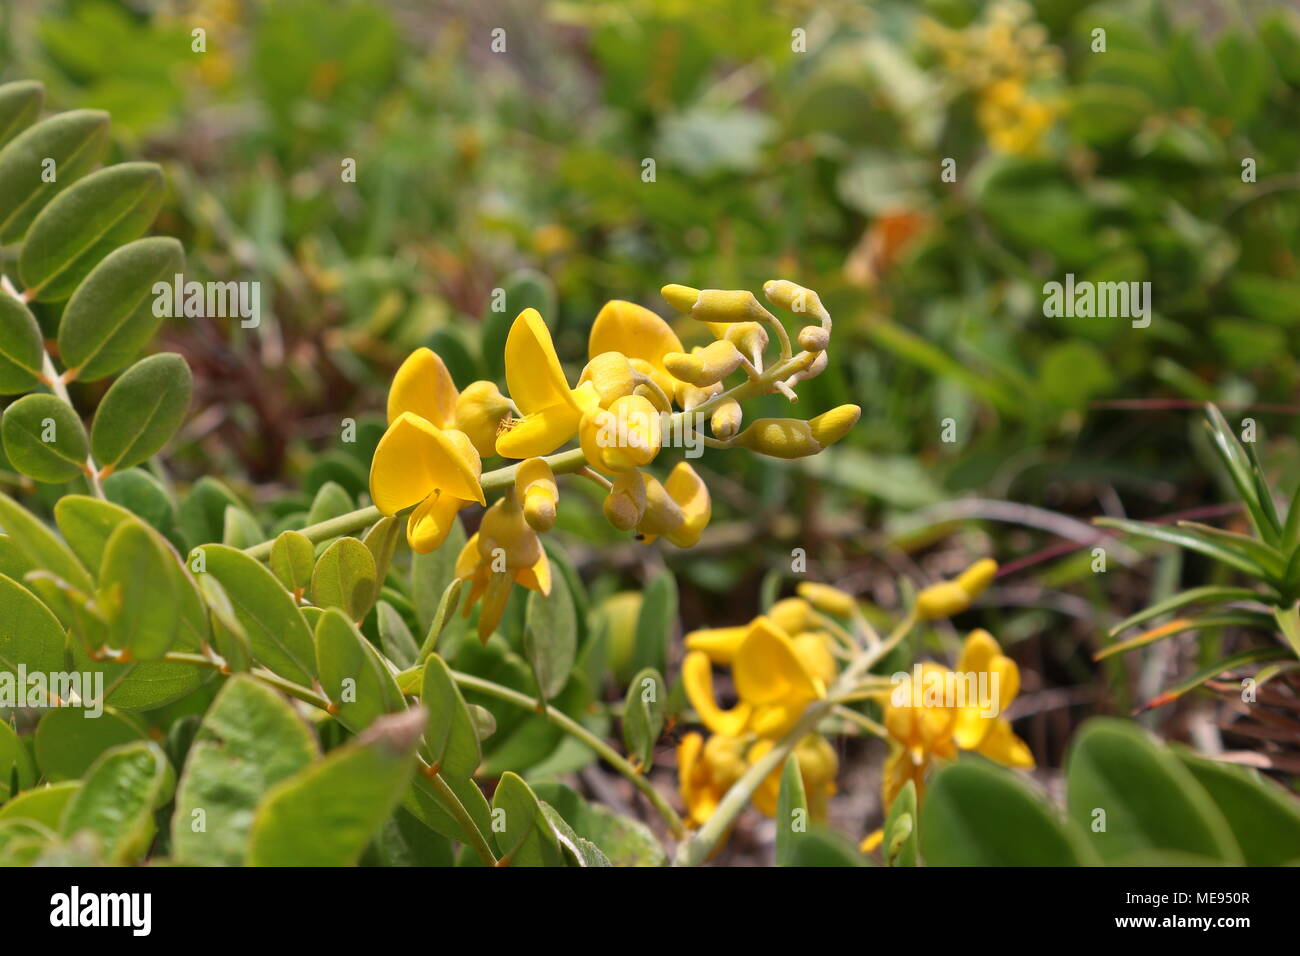 Yellow Crotalaria growing on the beach sand surrounded by green leaves Stock Photo